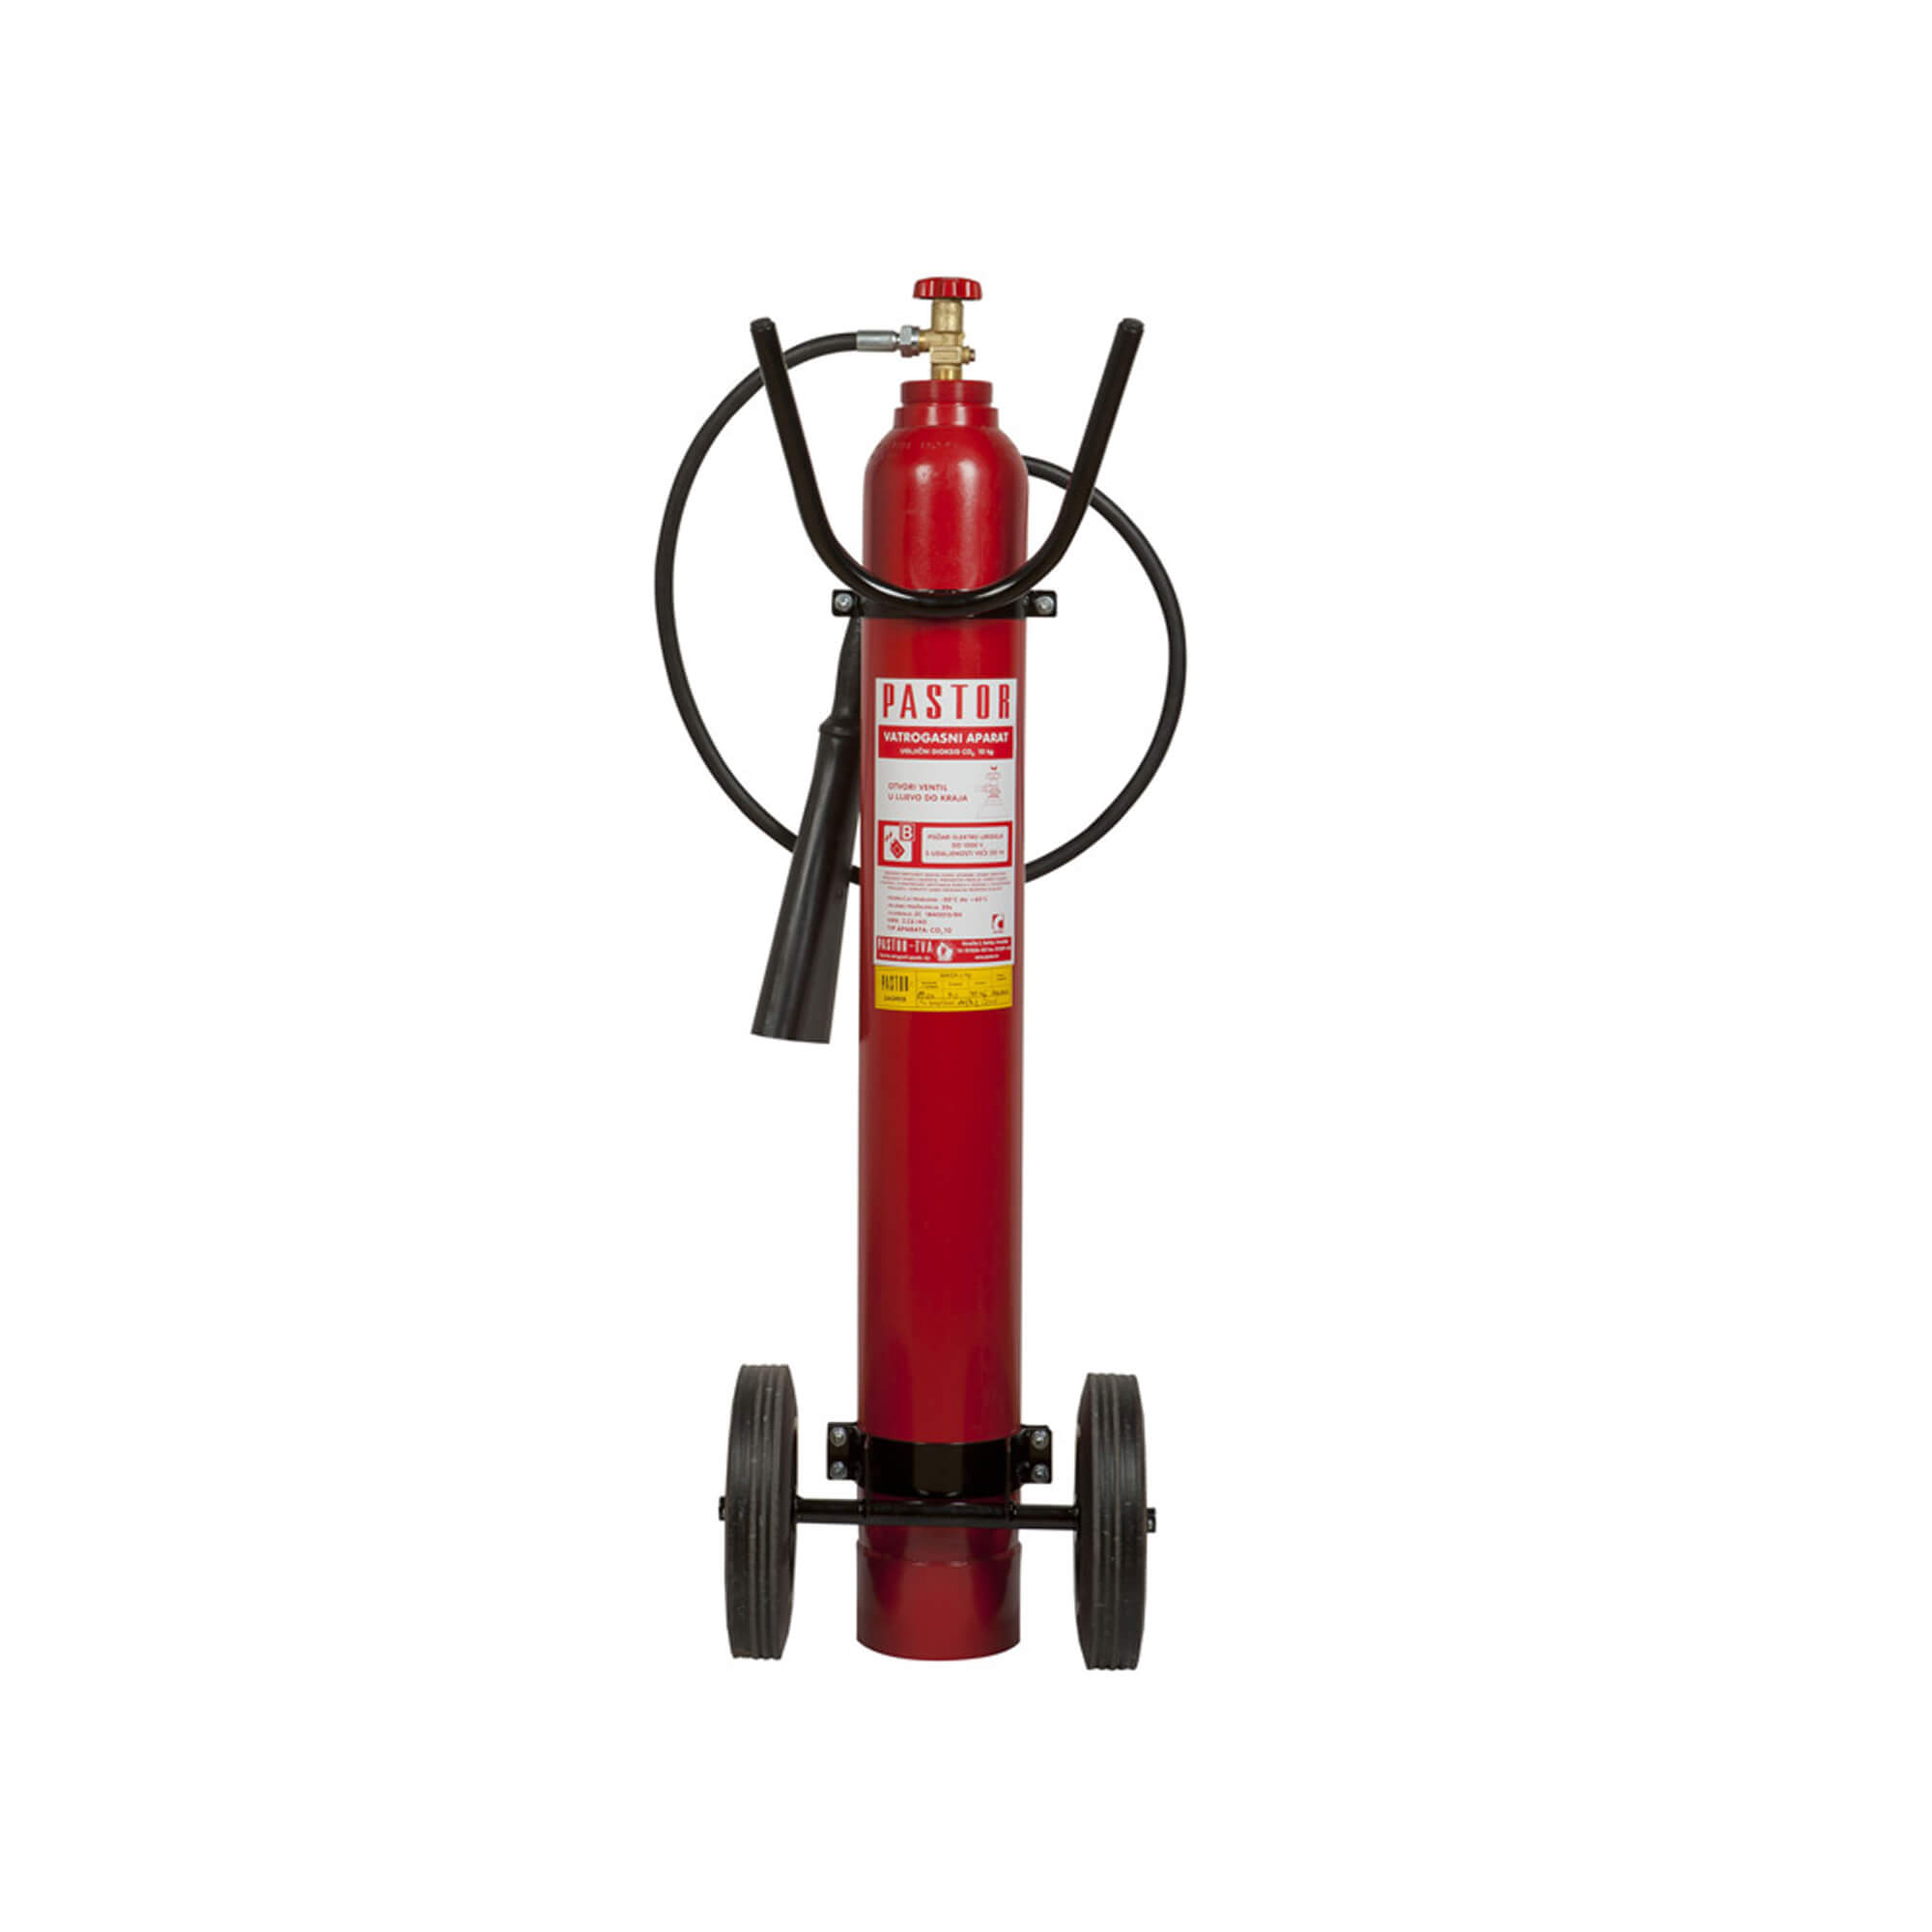 CO2-10 fire extinguisher with carbon dioxide